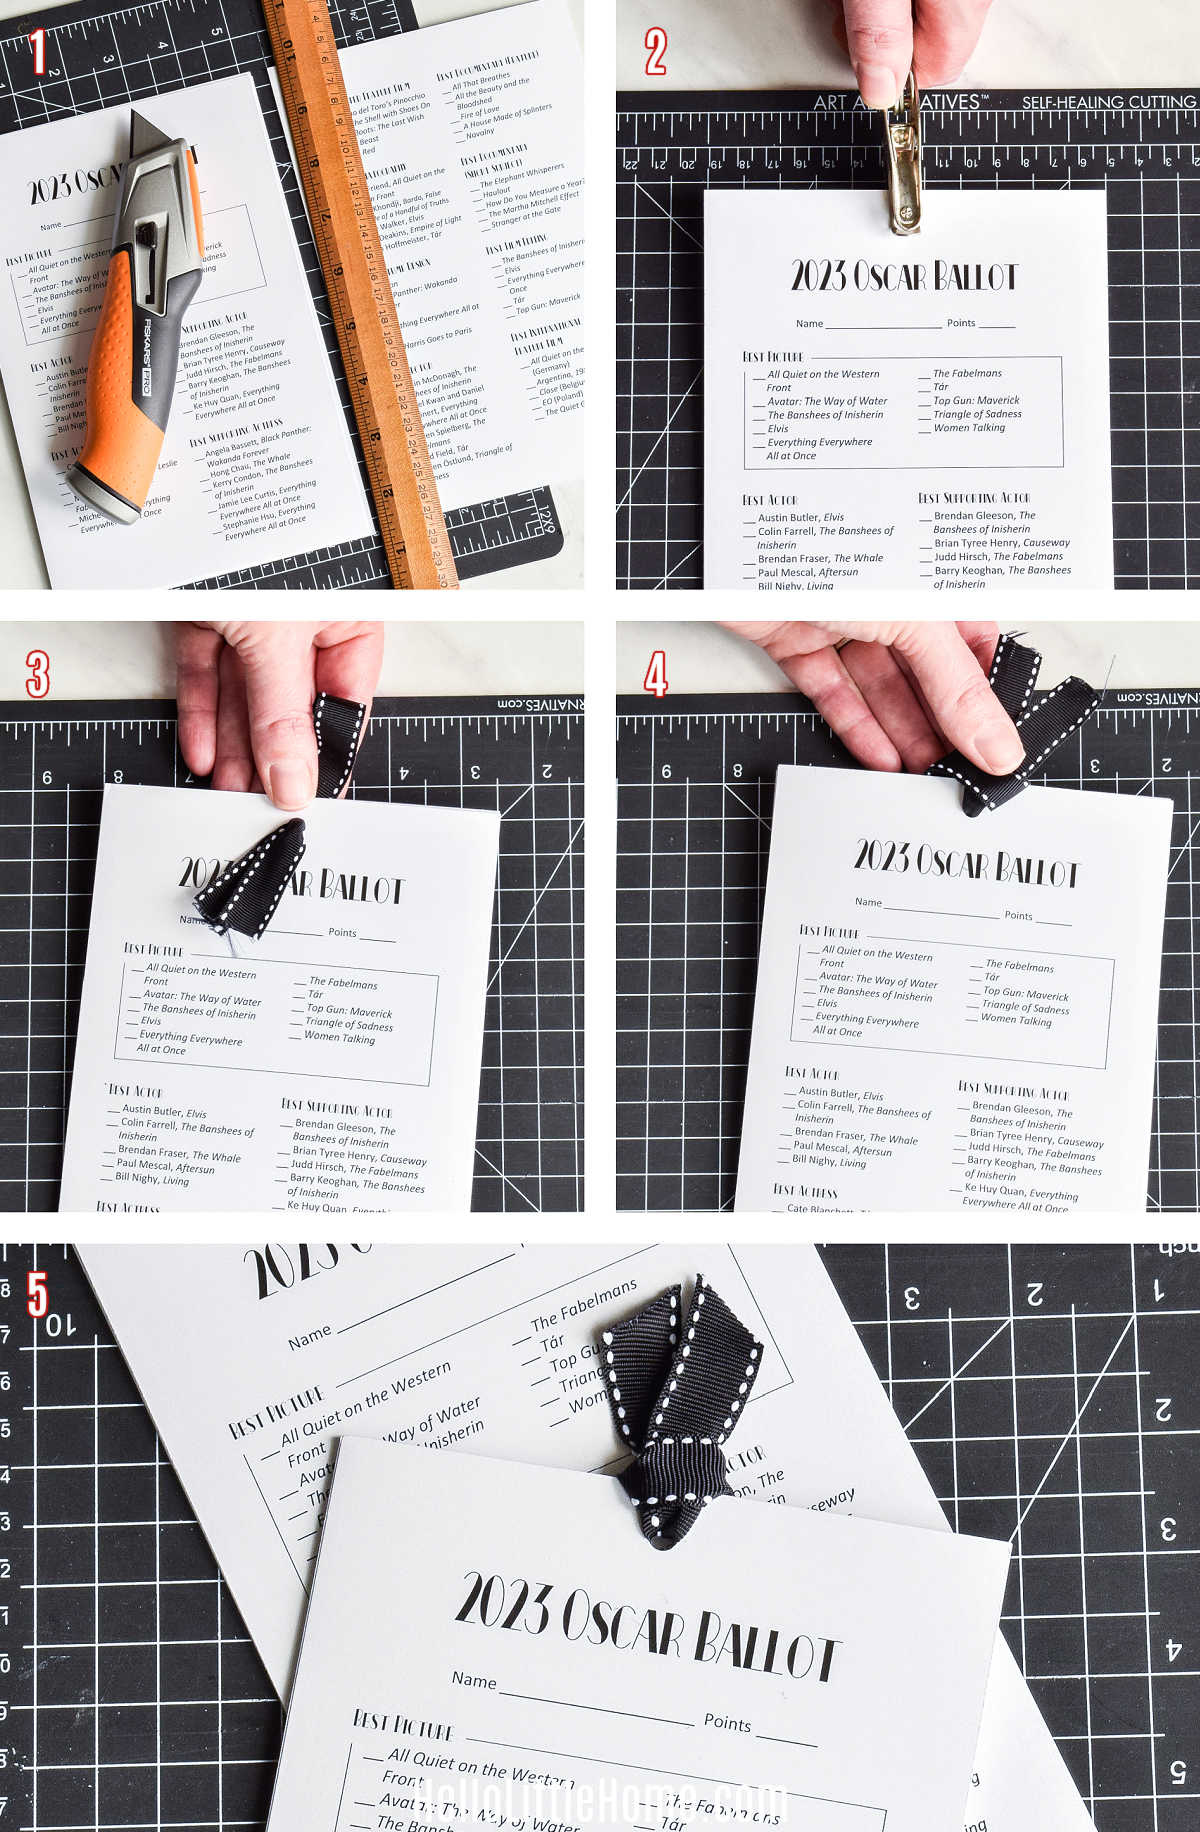 A photo collage showing how to assemble to the Oscar ballot template step-by-step.